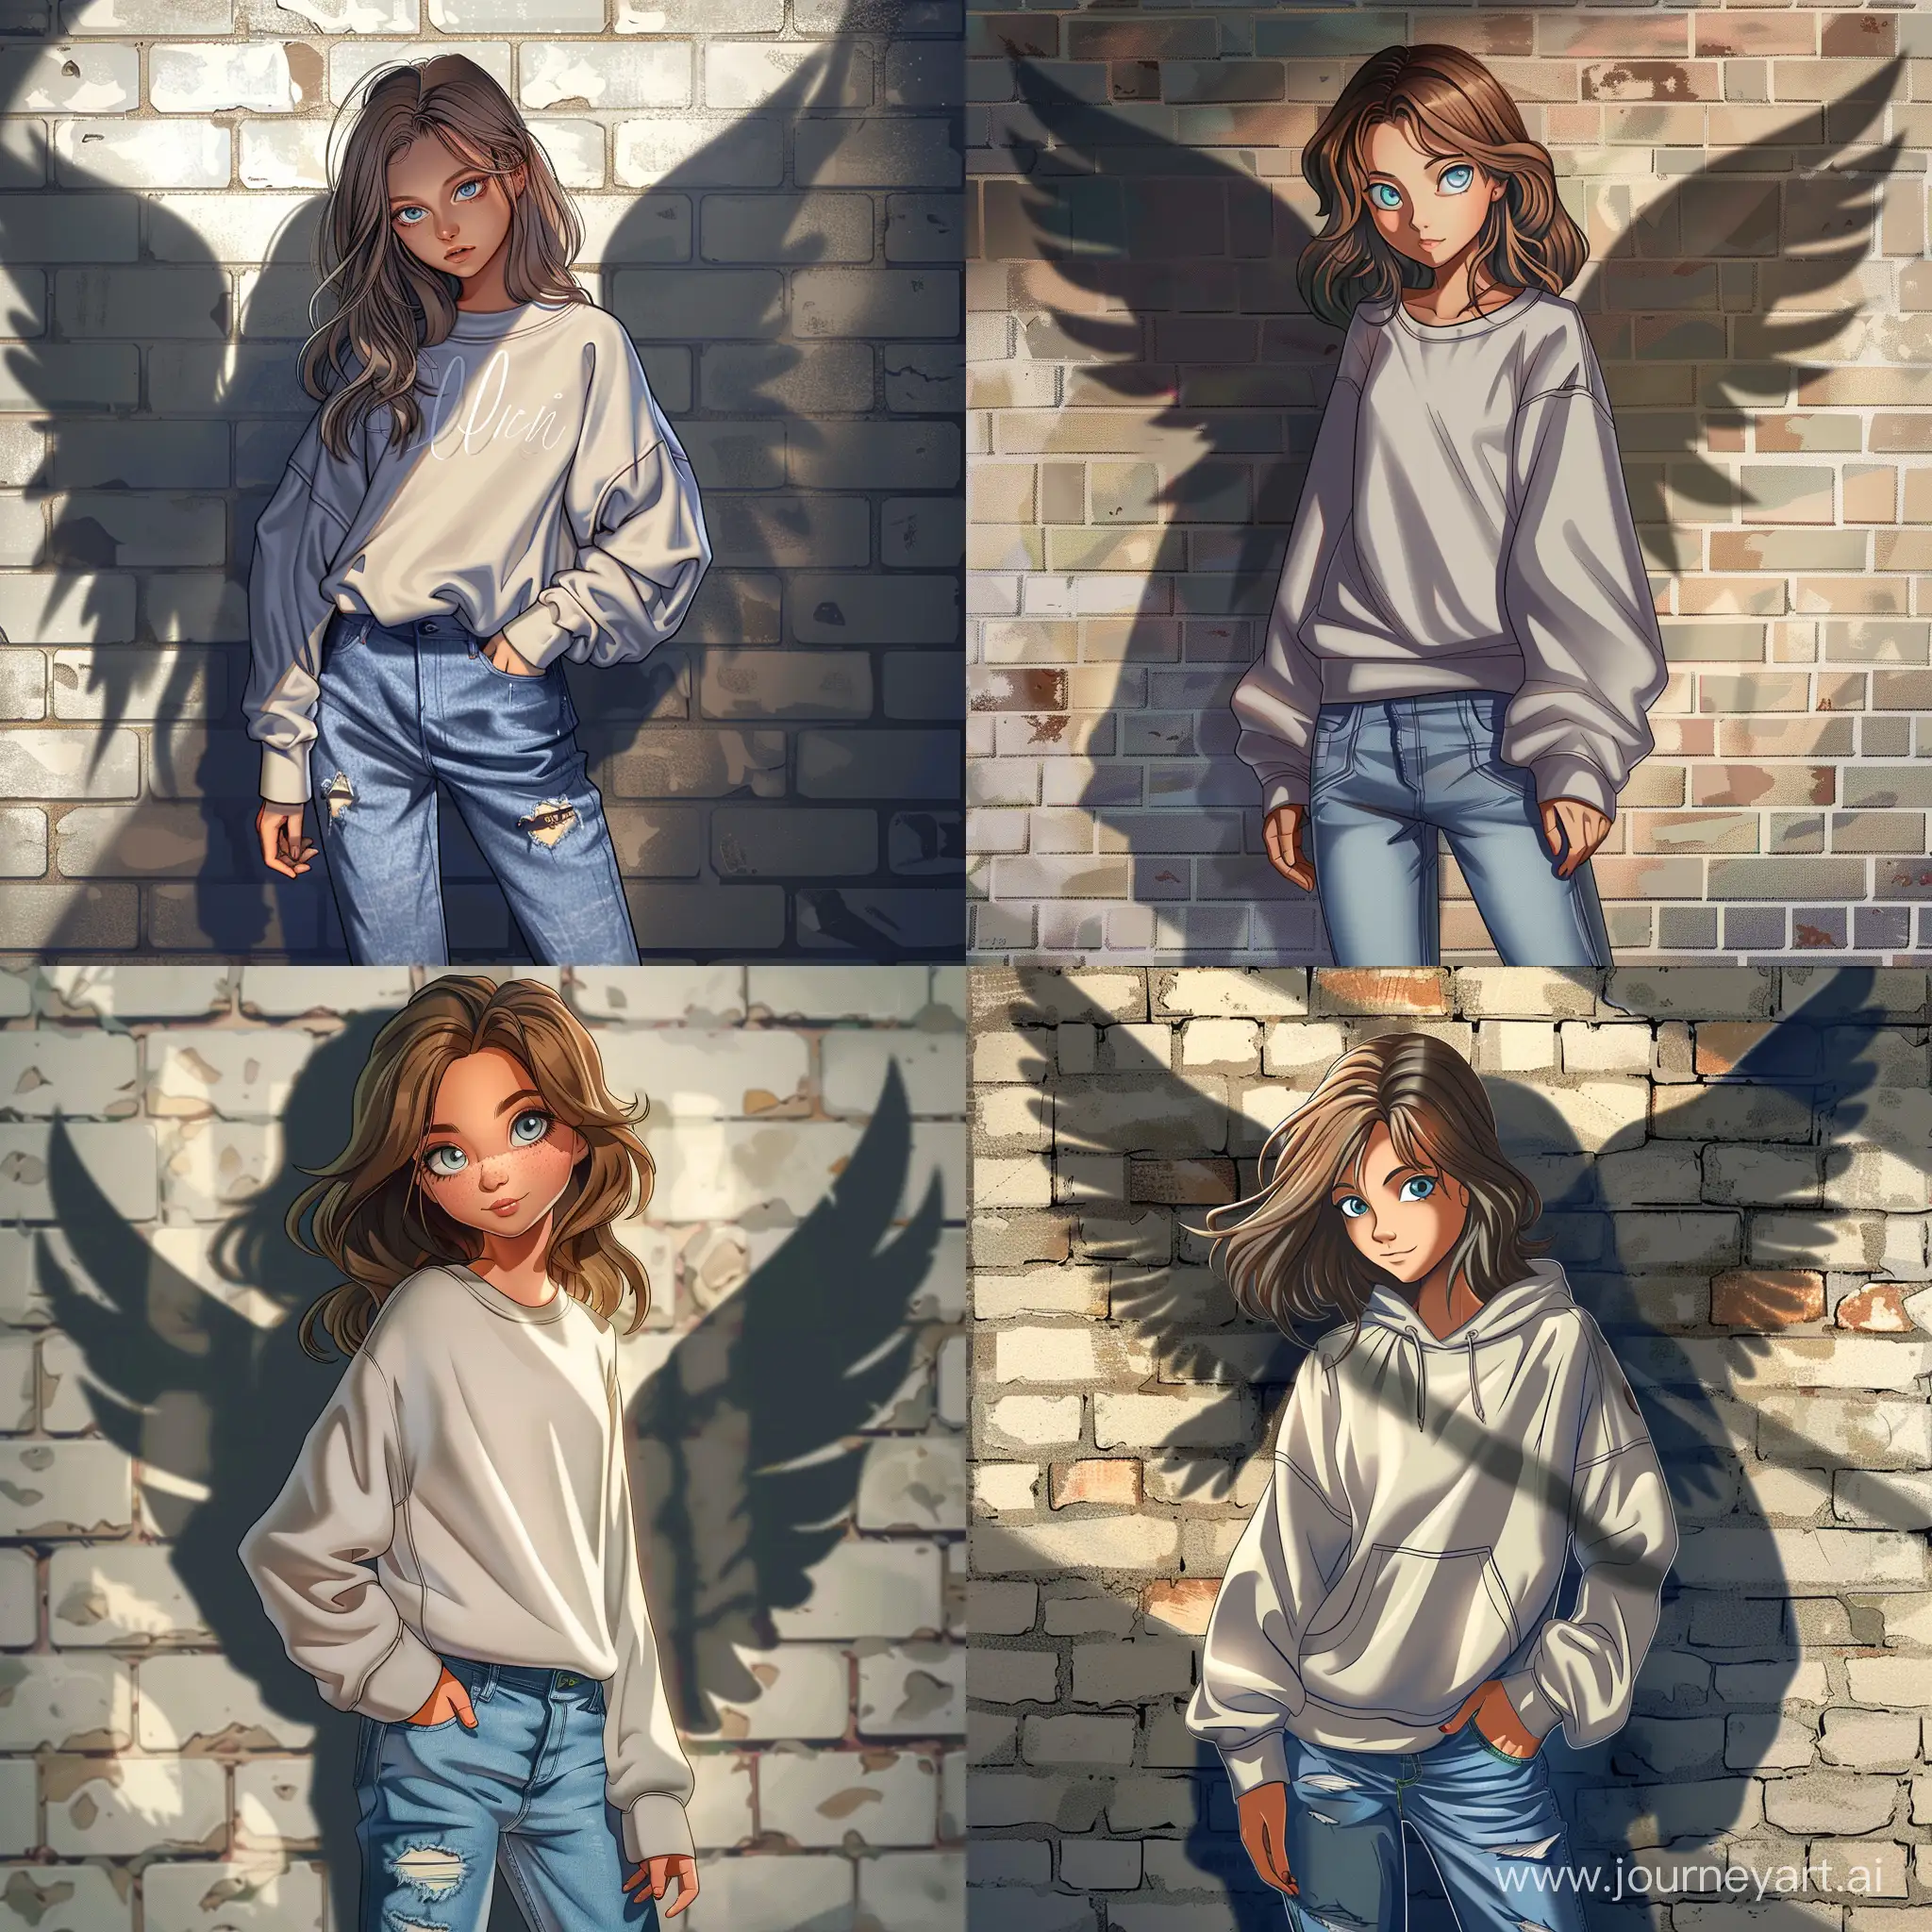 Charming-Teenage-Angel-Brownhaired-Beauty-with-Oversized-Sweatshirt-and-Winged-Shadow